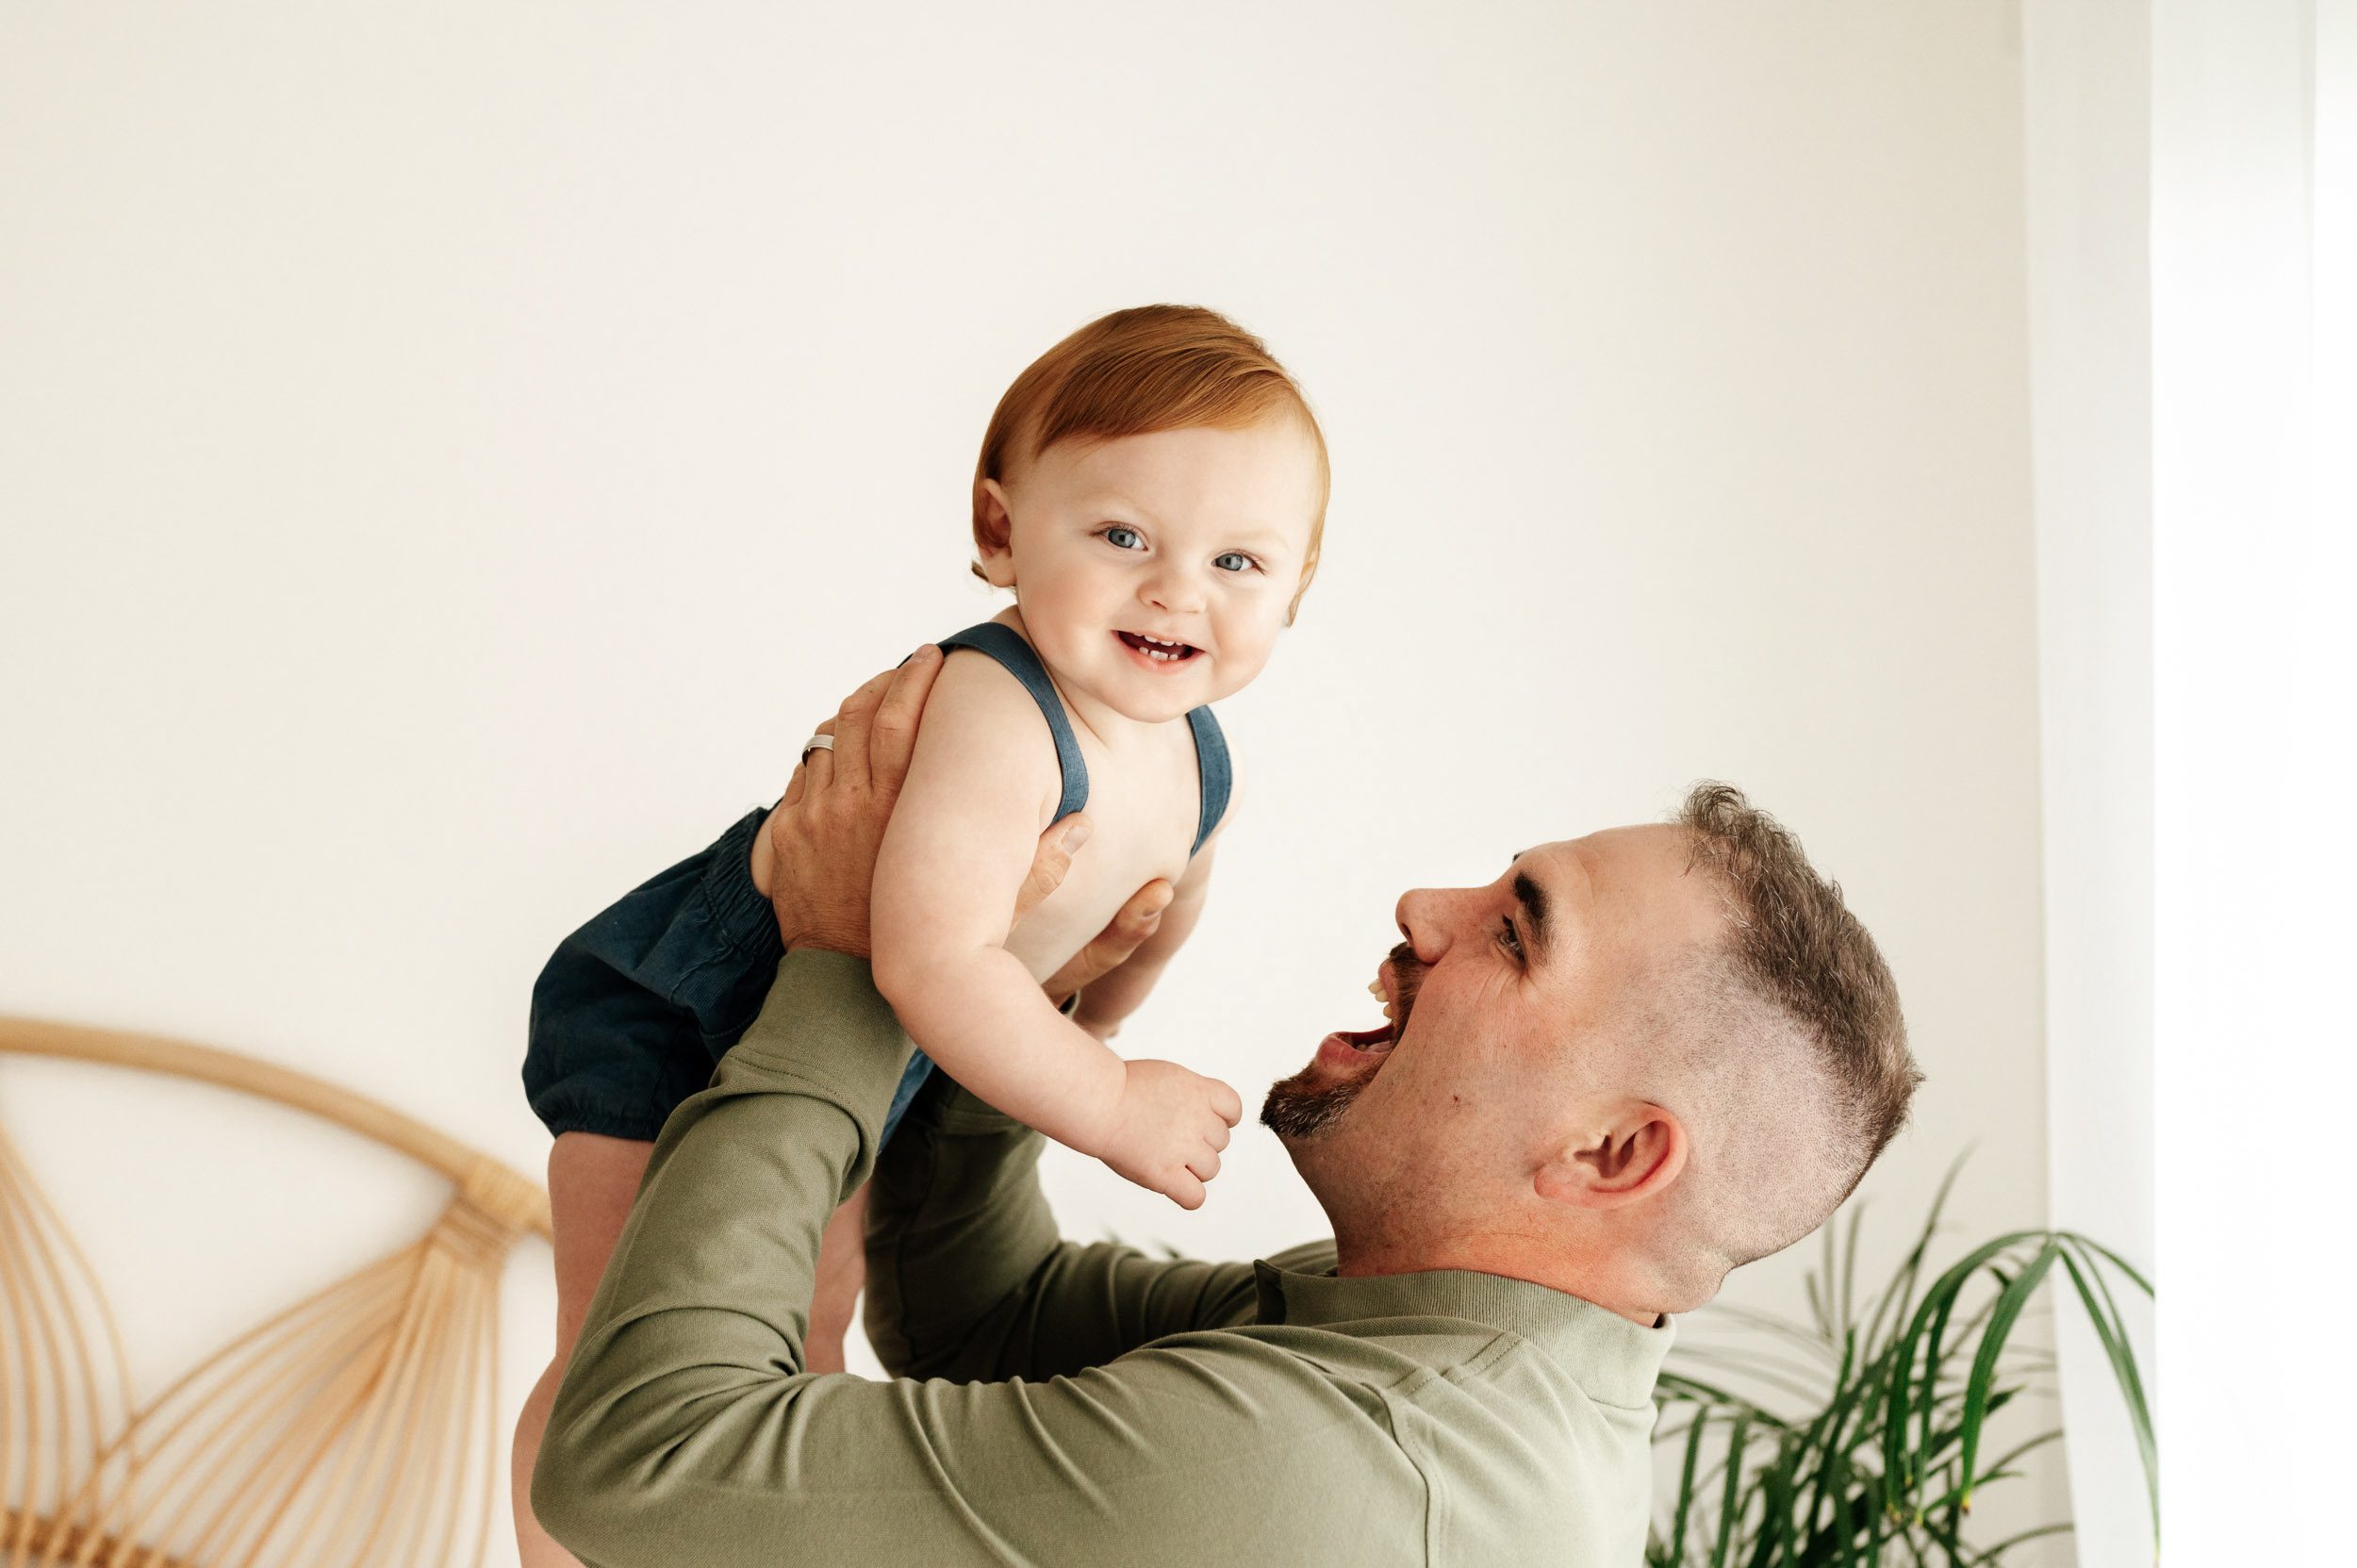 a father lifting his young son up in the air while the boy looks at the camera and smiles